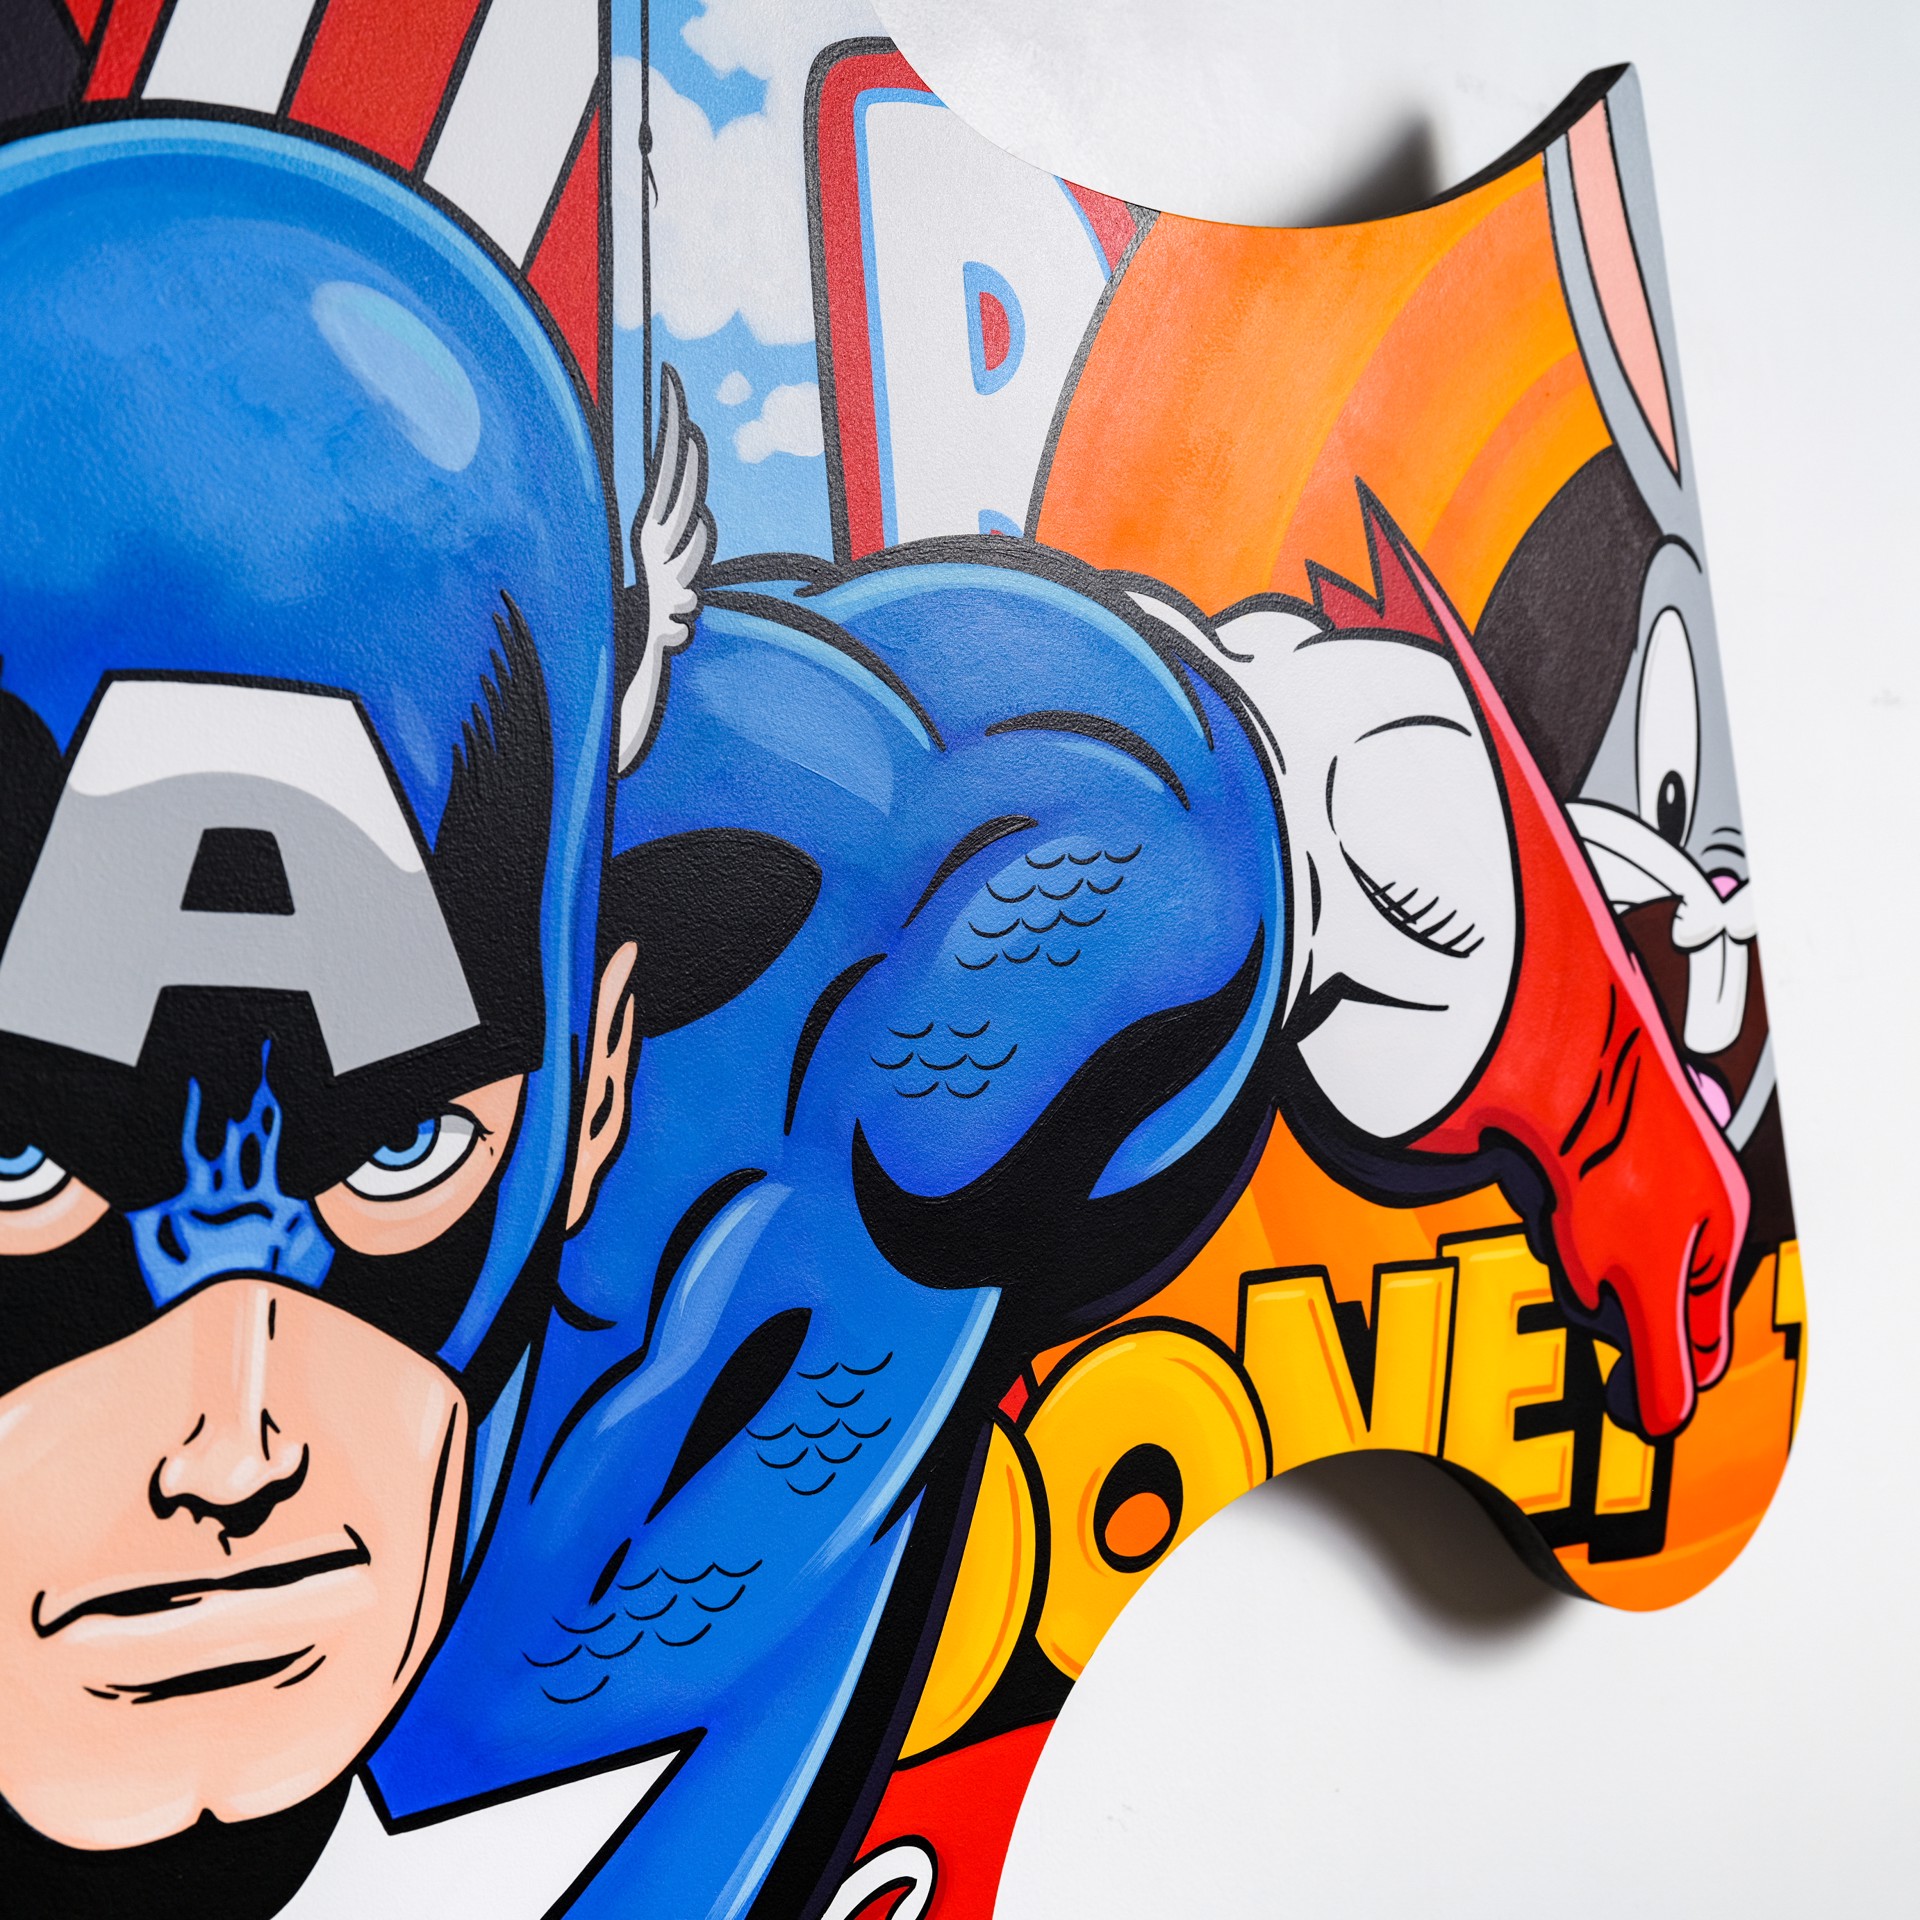 Captain America in NY - Puzzle by Boudro